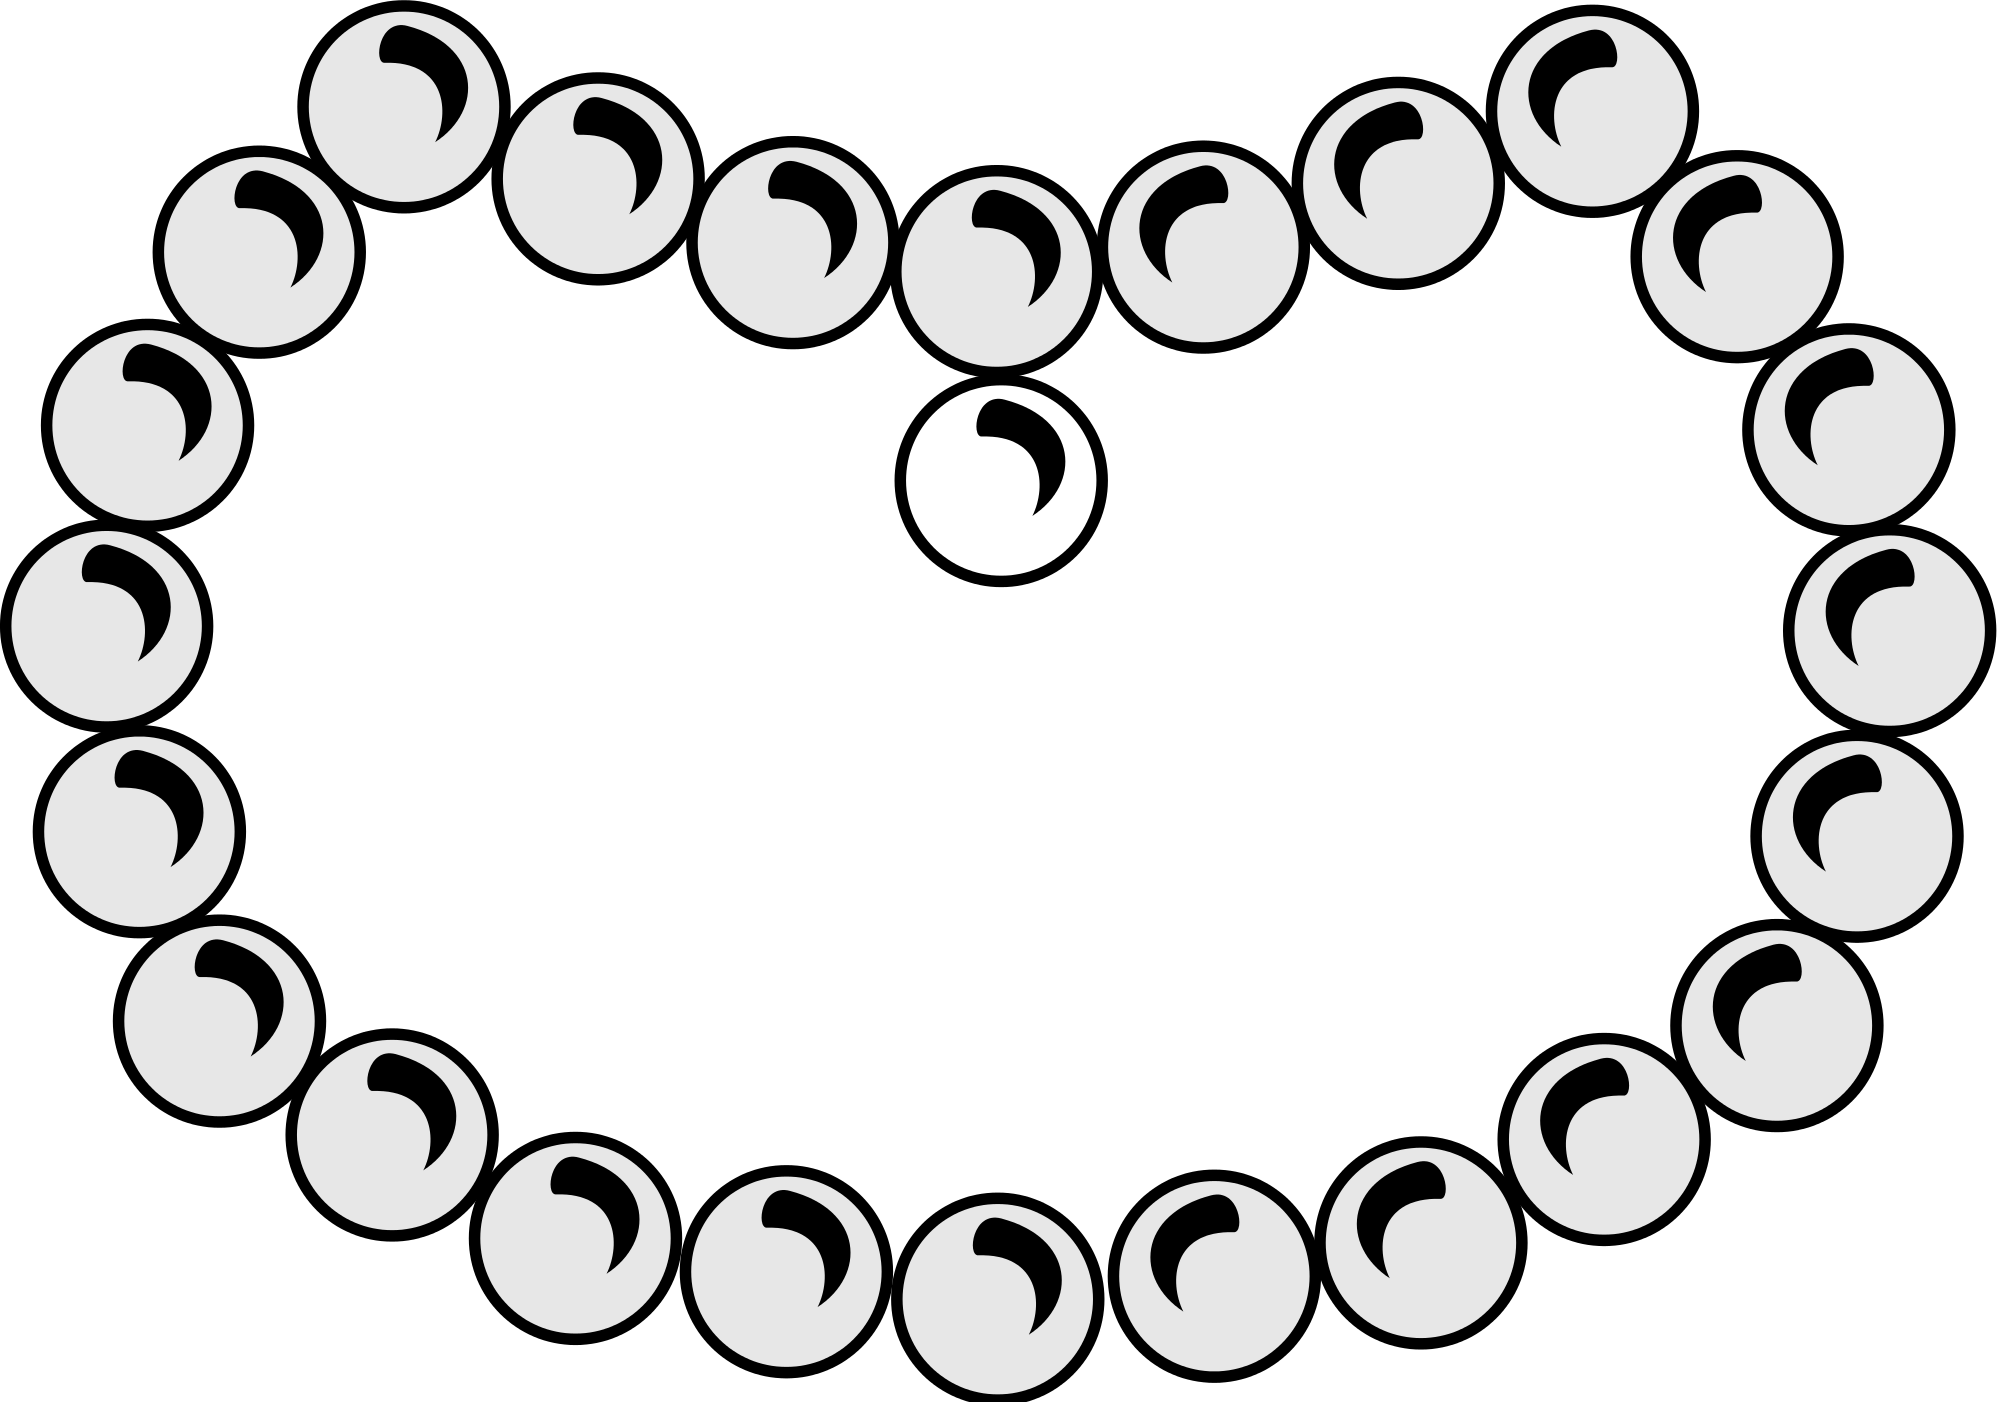 Necklace svg #11, Download drawings